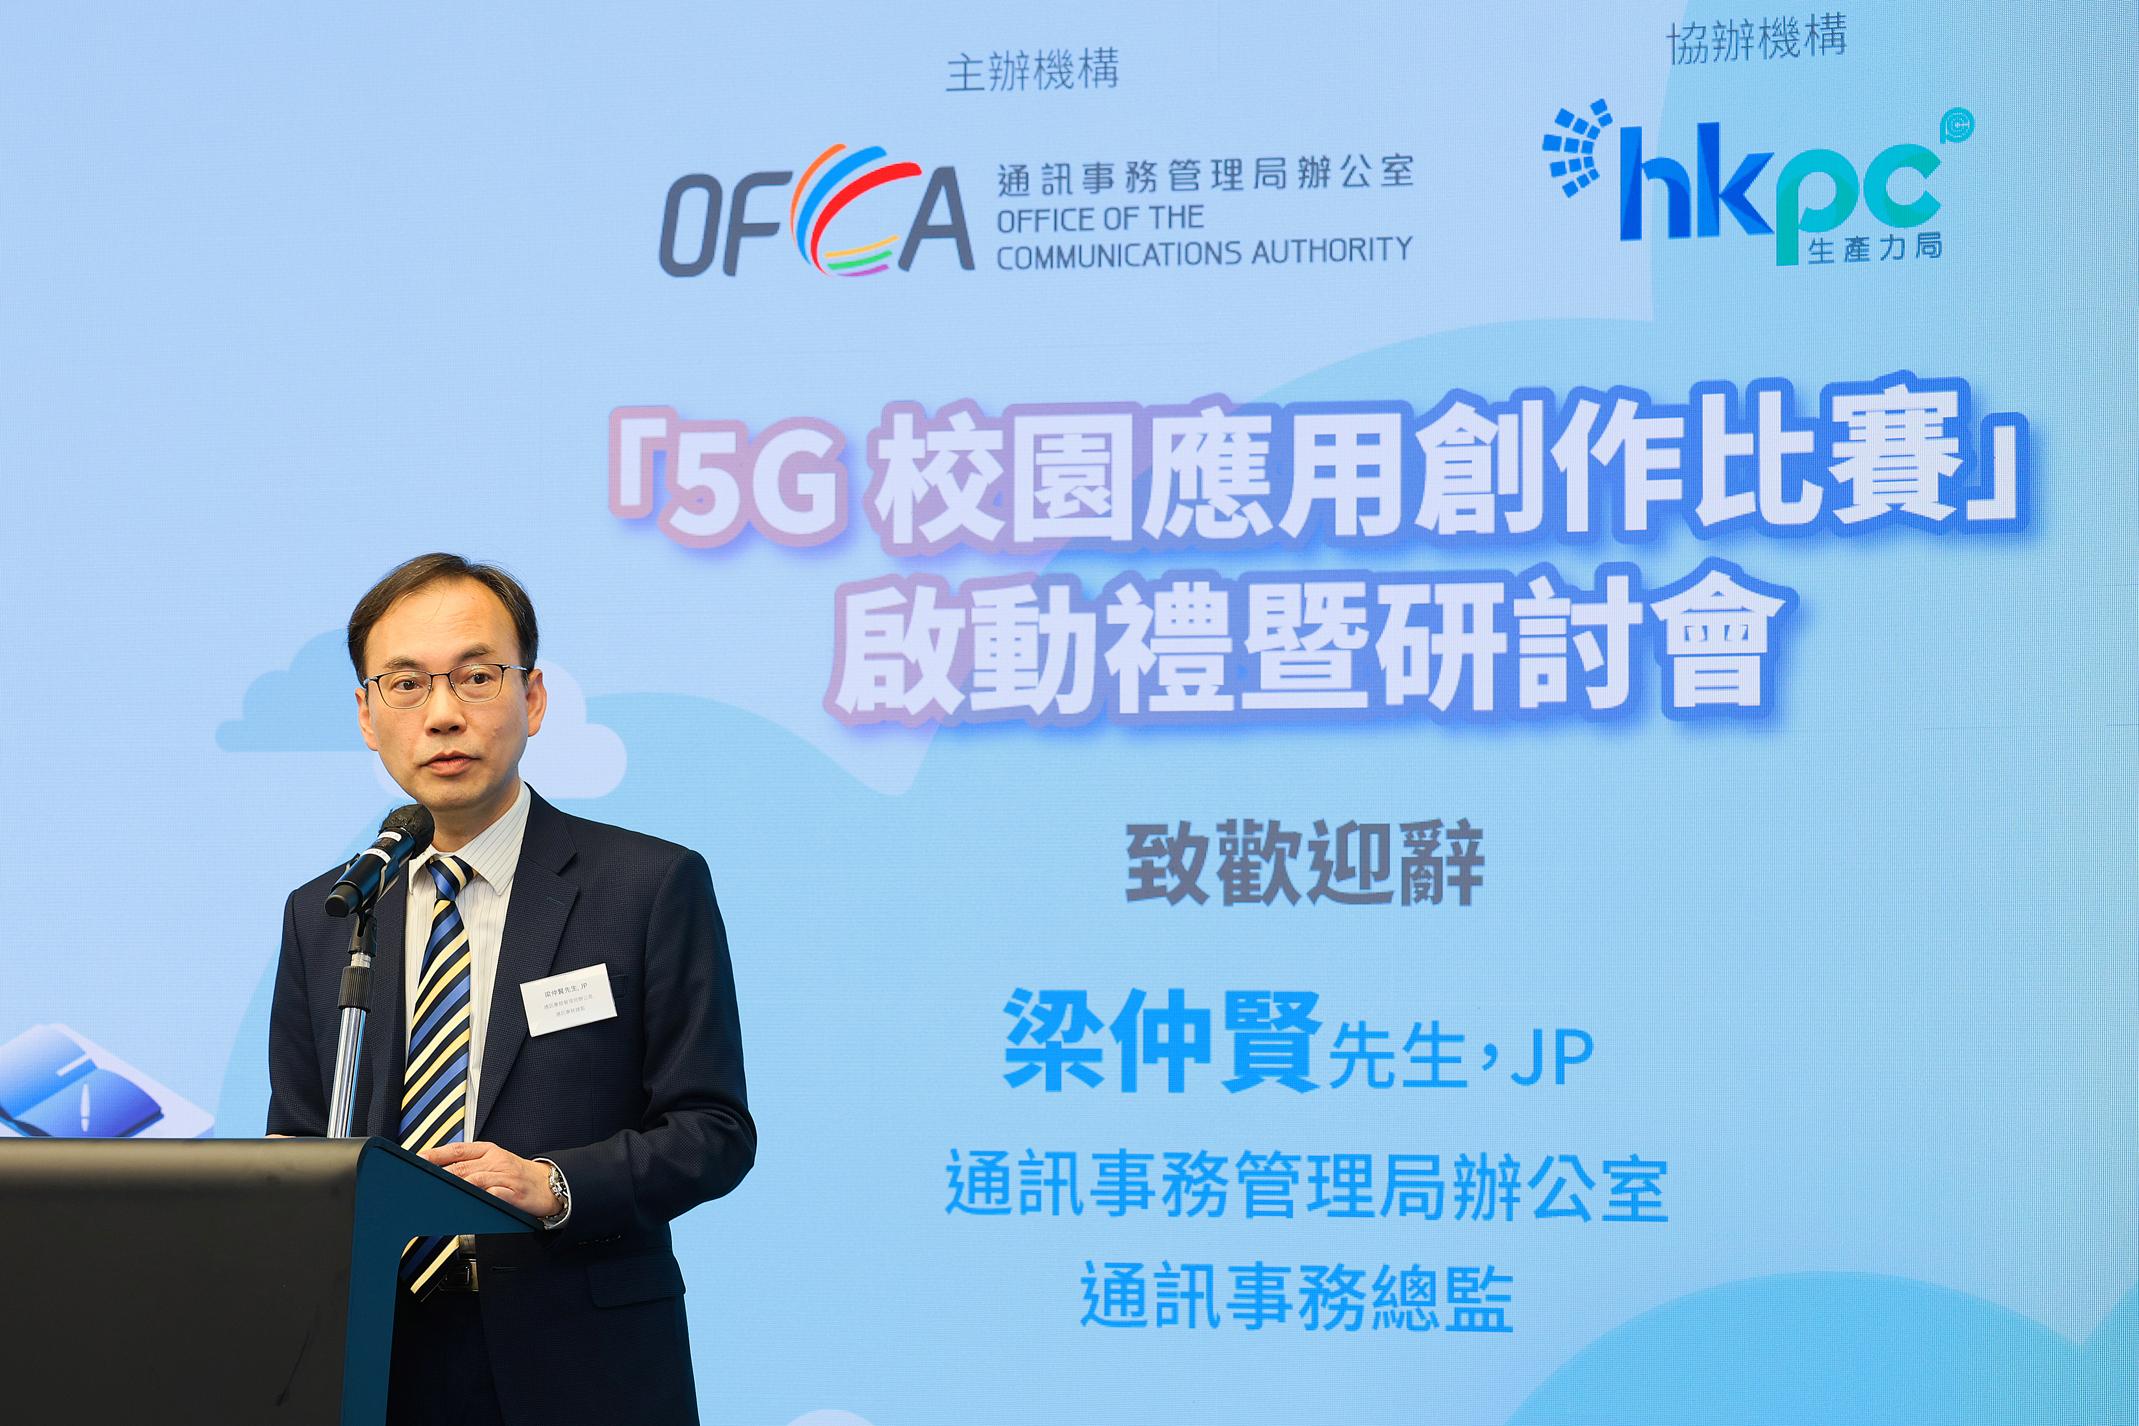 The Director-General of Communications, Mr Chaucer Leung, delivers opening remarks at the Kick-off Seminar of the "5G Campus Application Competition" today (May 20).